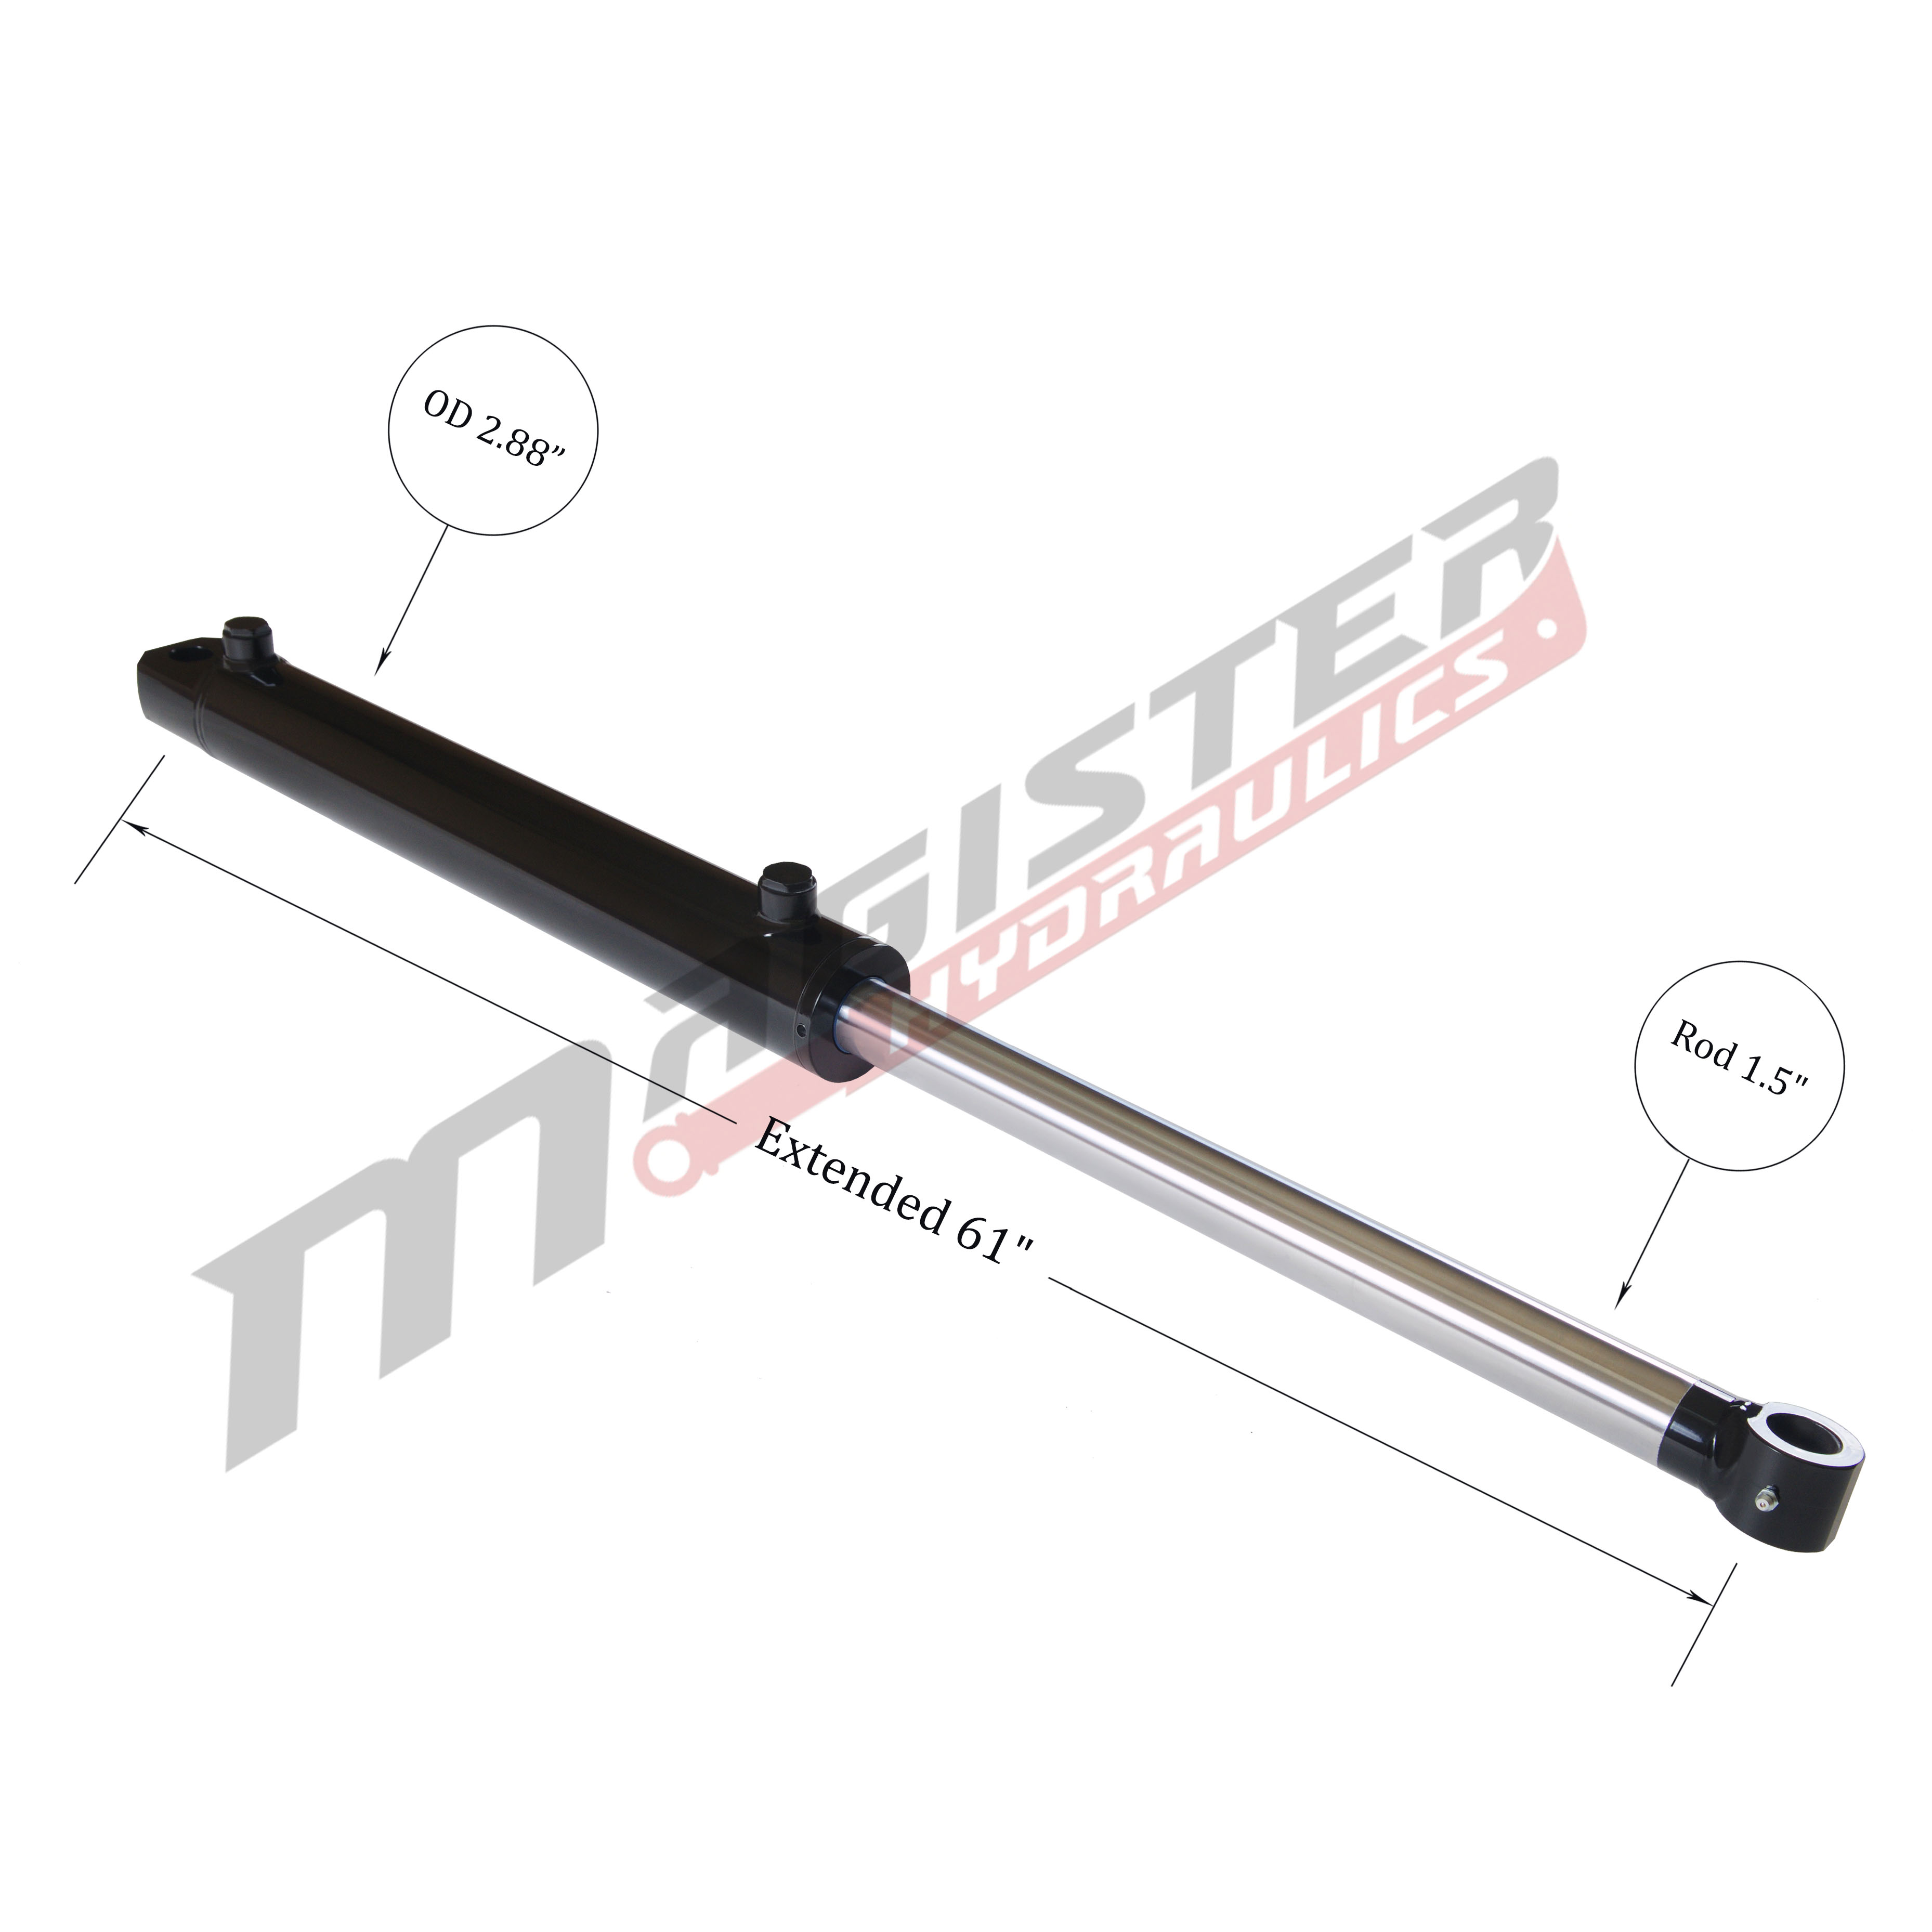 2.5 bore x 26 stroke hydraulic cylinder, welded tang double acting cylinder | Magister Hydraulics